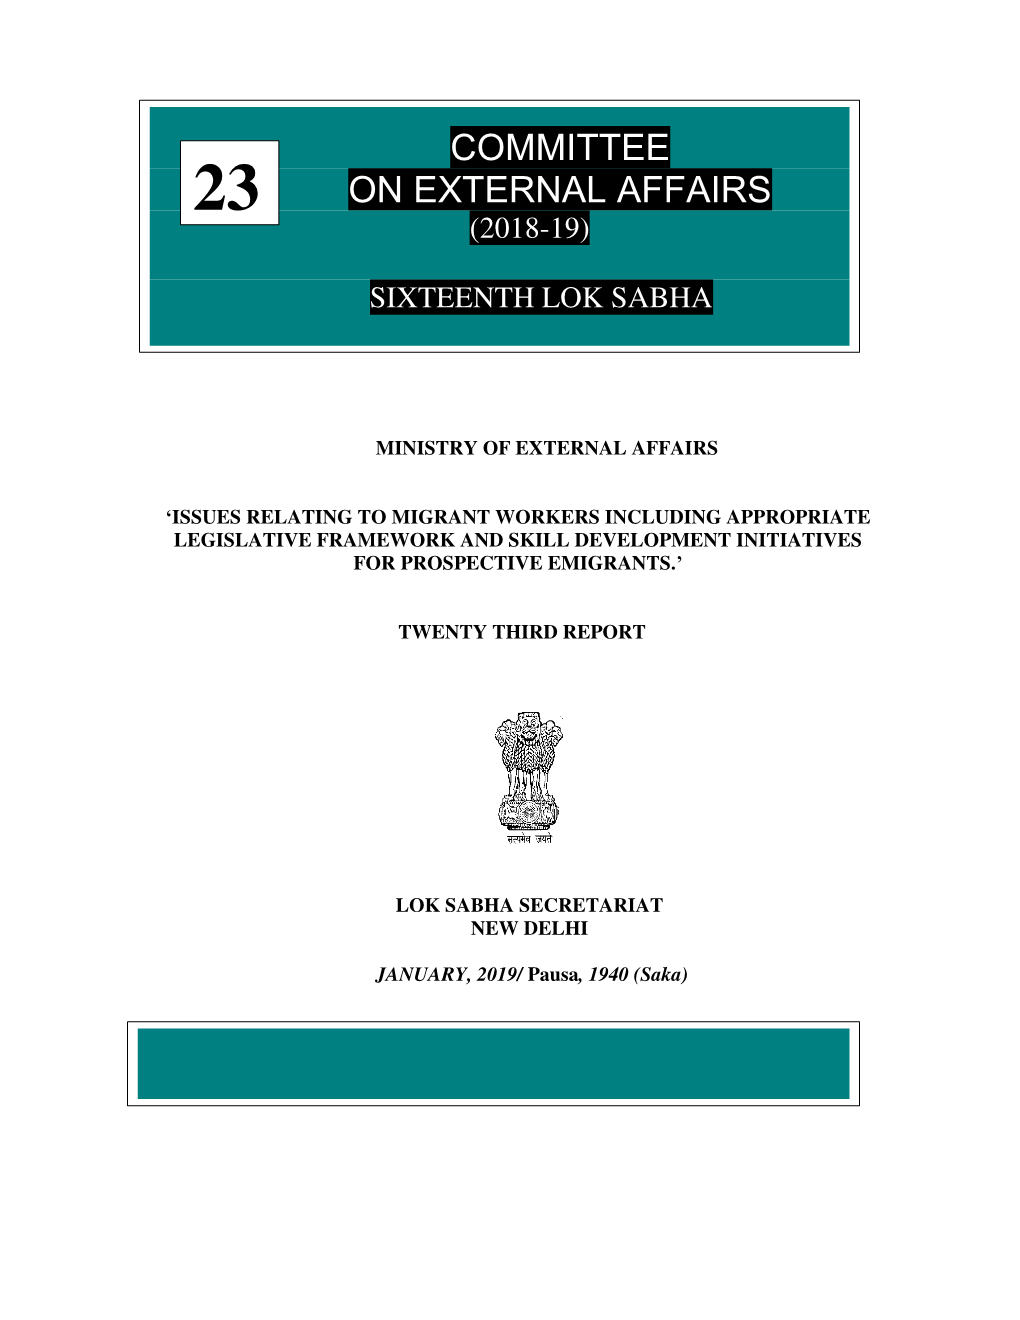 Committee on External Affairs (2018-19)